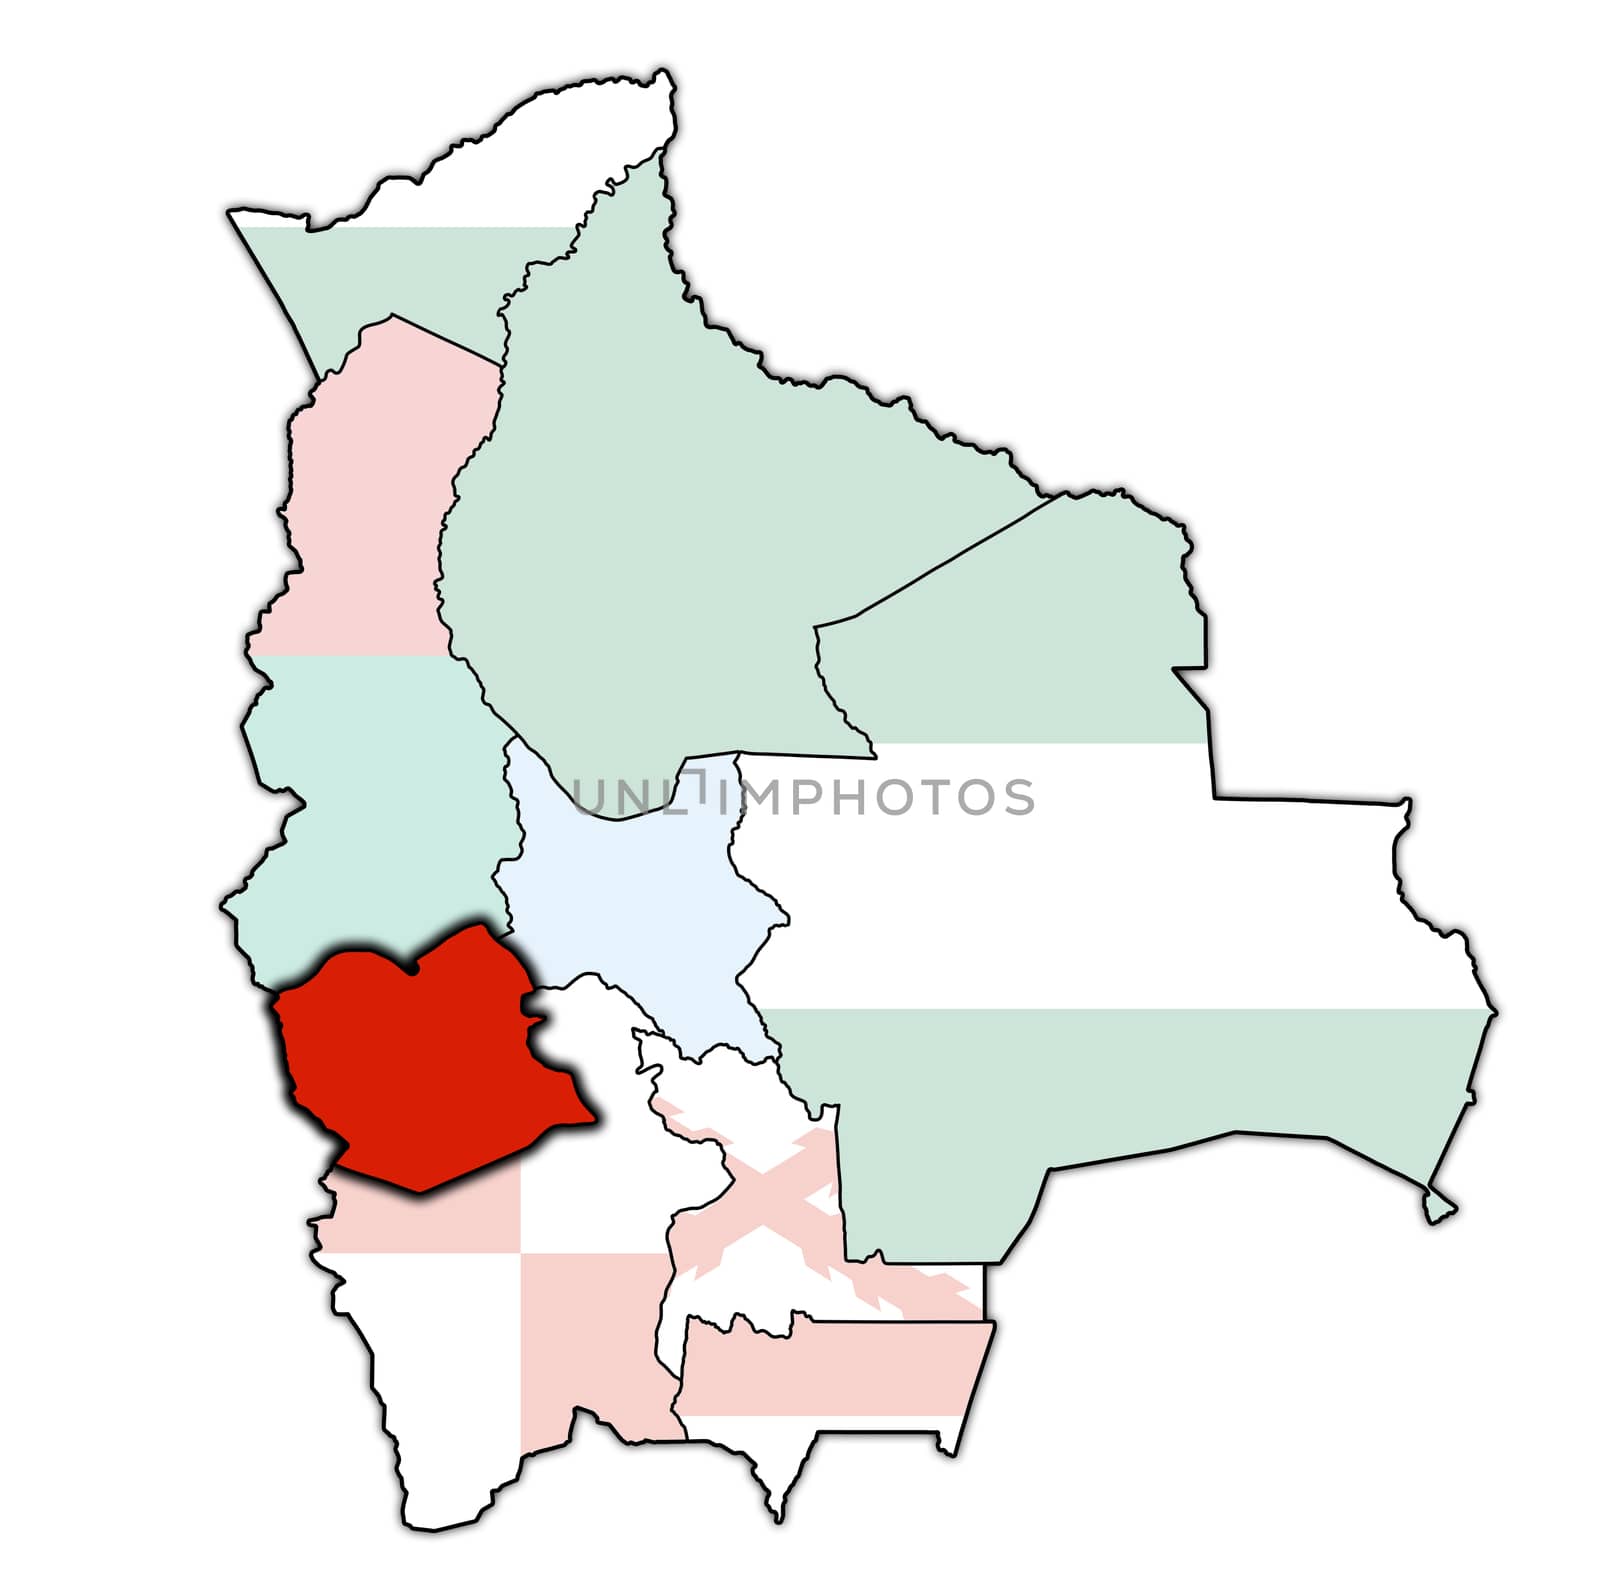 territory and flag of Oruro region on map with administrative divisions and borders of Bolivia with clipping path